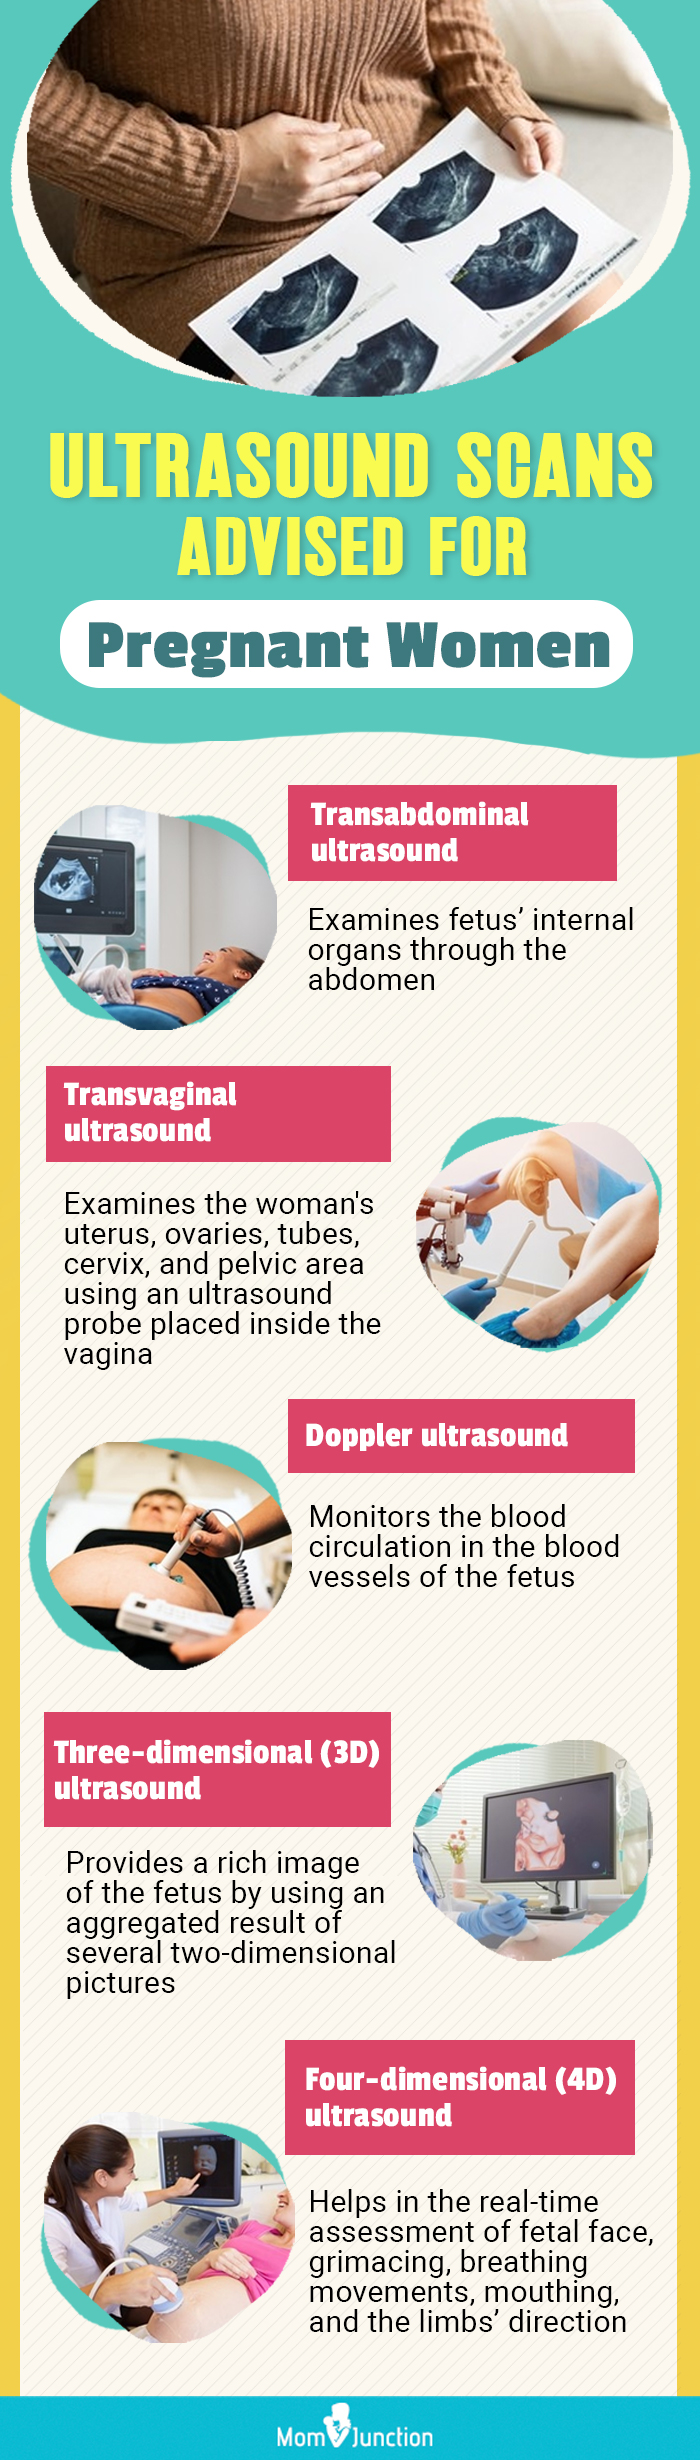 ultrasound scans advised for pregnant women (infographic)